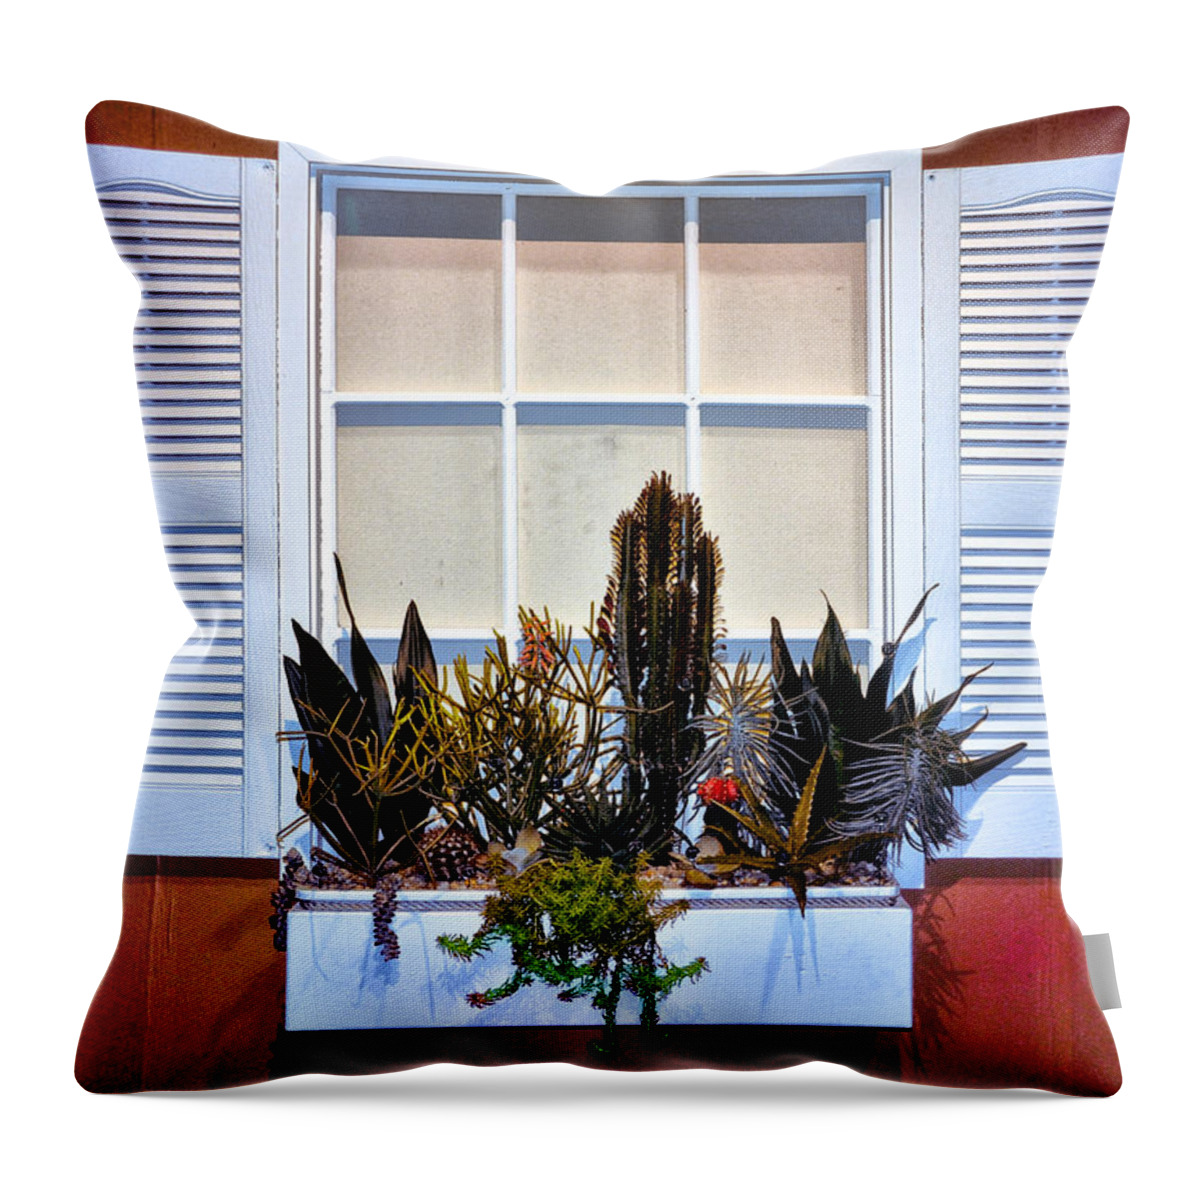 White Throw Pillow featuring the photograph White Window with Flower Box on a Red House by Bill Cannon